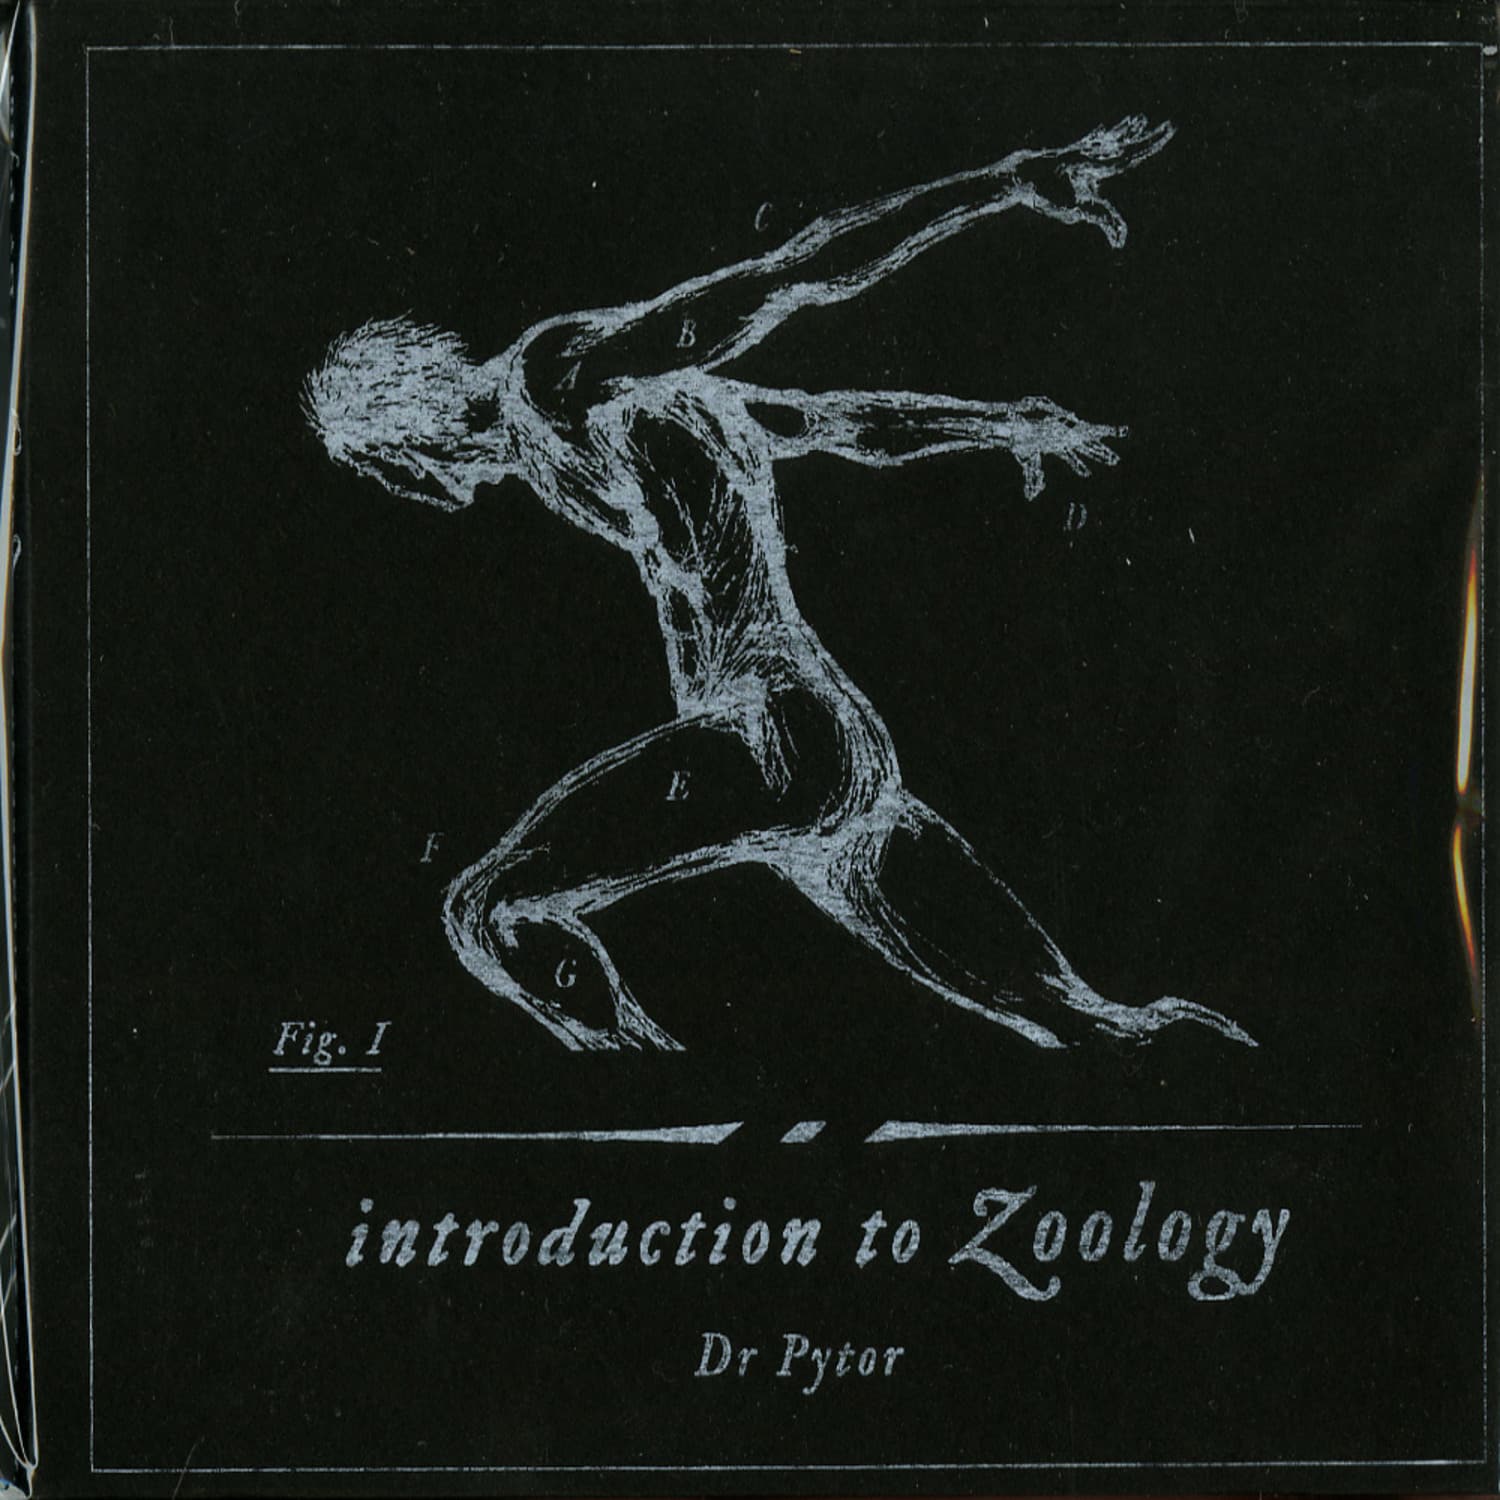 Dr. Pytor - INTRODUCTION TO ZOOLOGY 